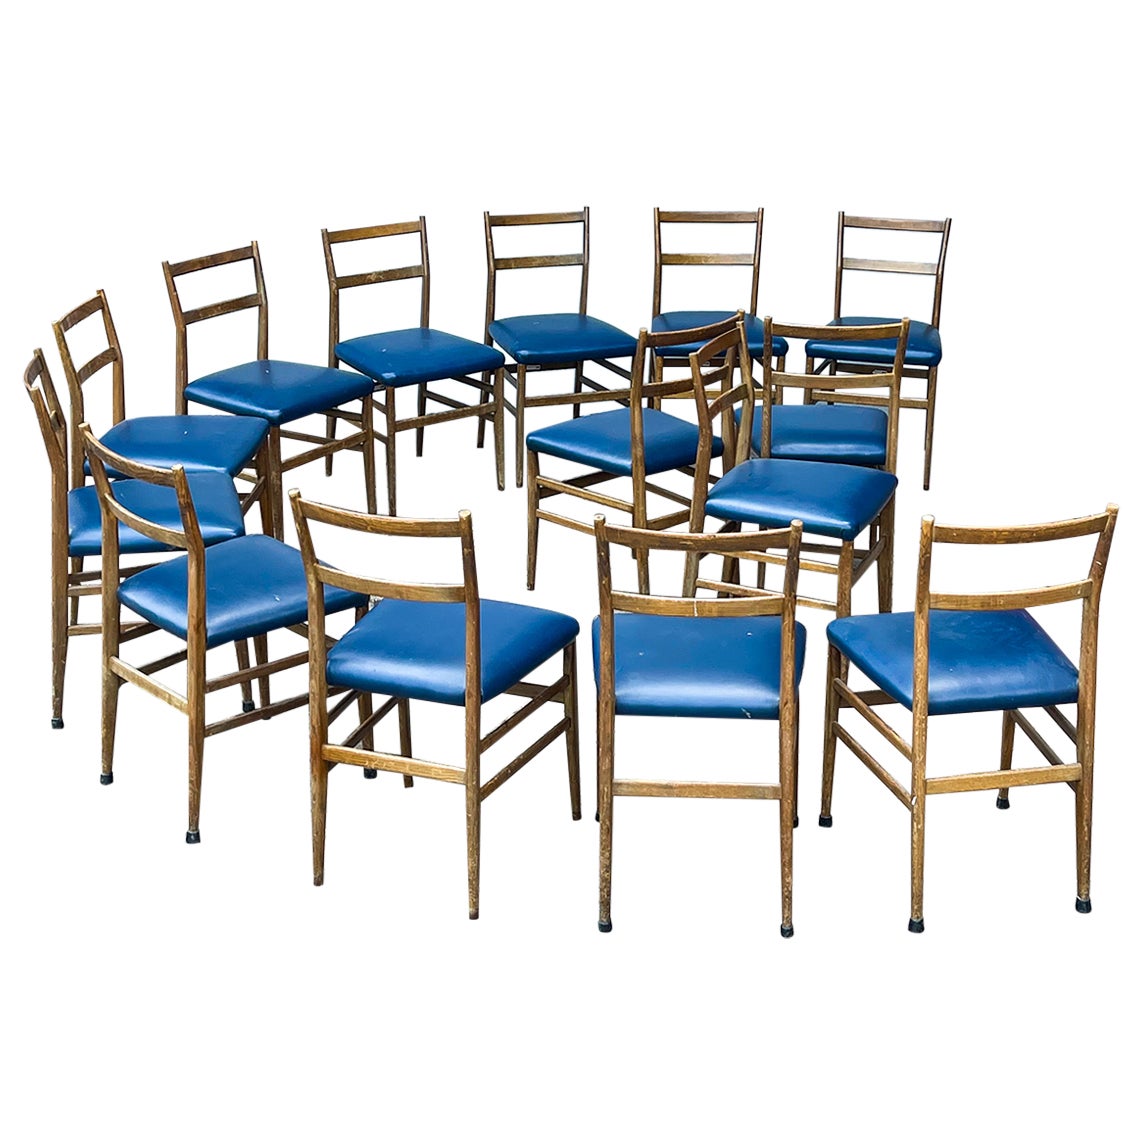 14 Mid Century Italian Dining Chairs, By Gio Ponti - Wood And Blue Leather - 